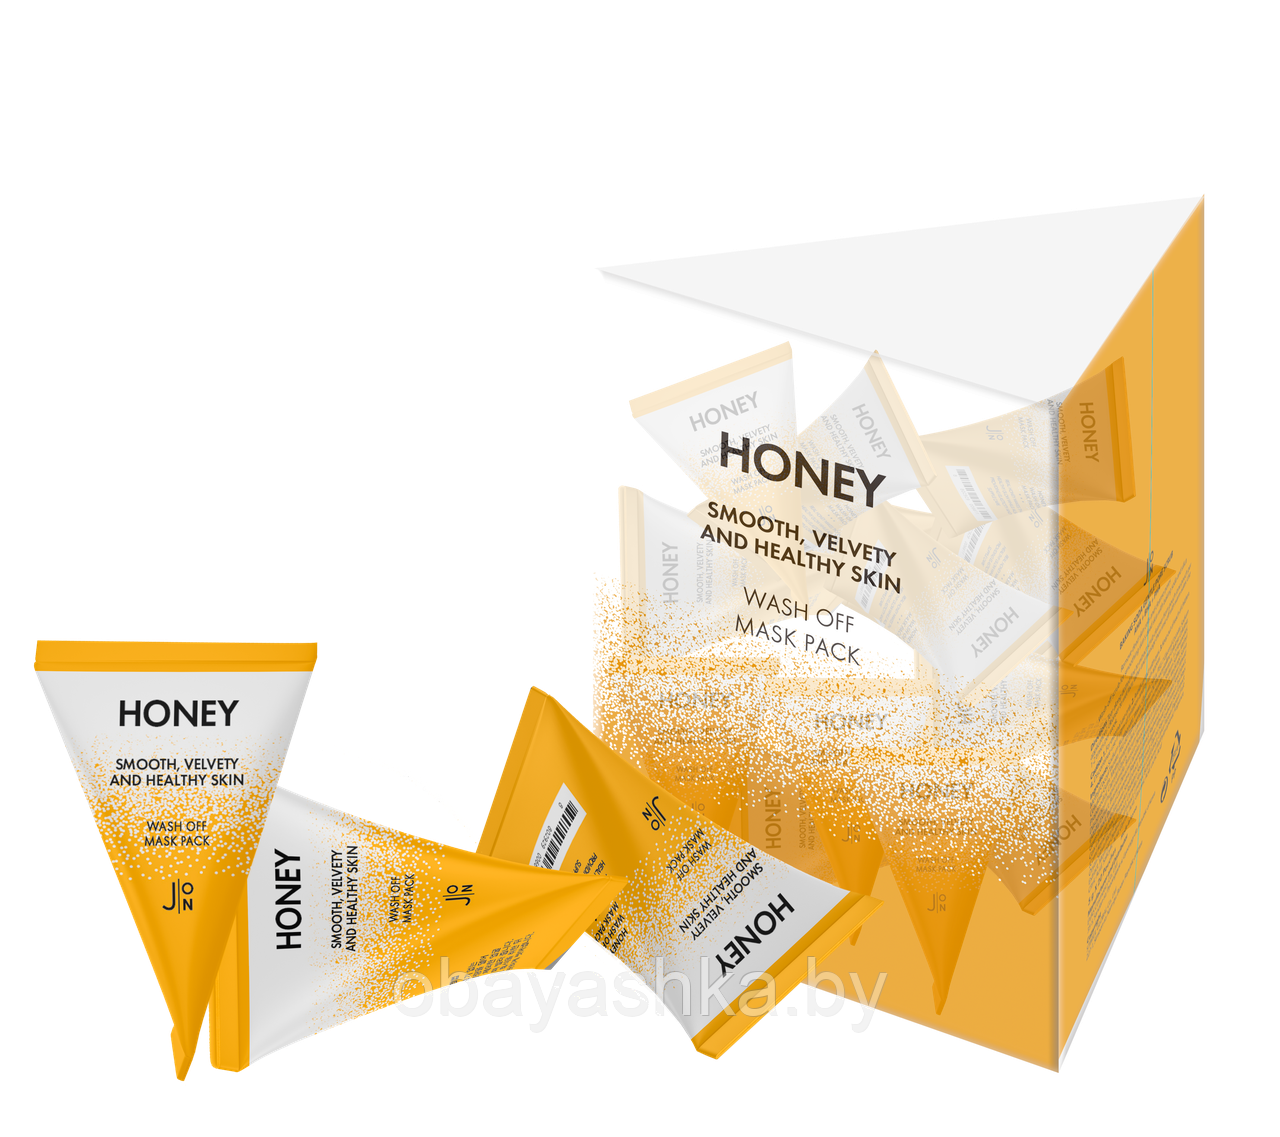 [J:ON] МЕД Маска для лица Honey Smooth Velvety and Healthy Skin Wash Off Mask Pack, 5гр - фото 1 - id-p145257438